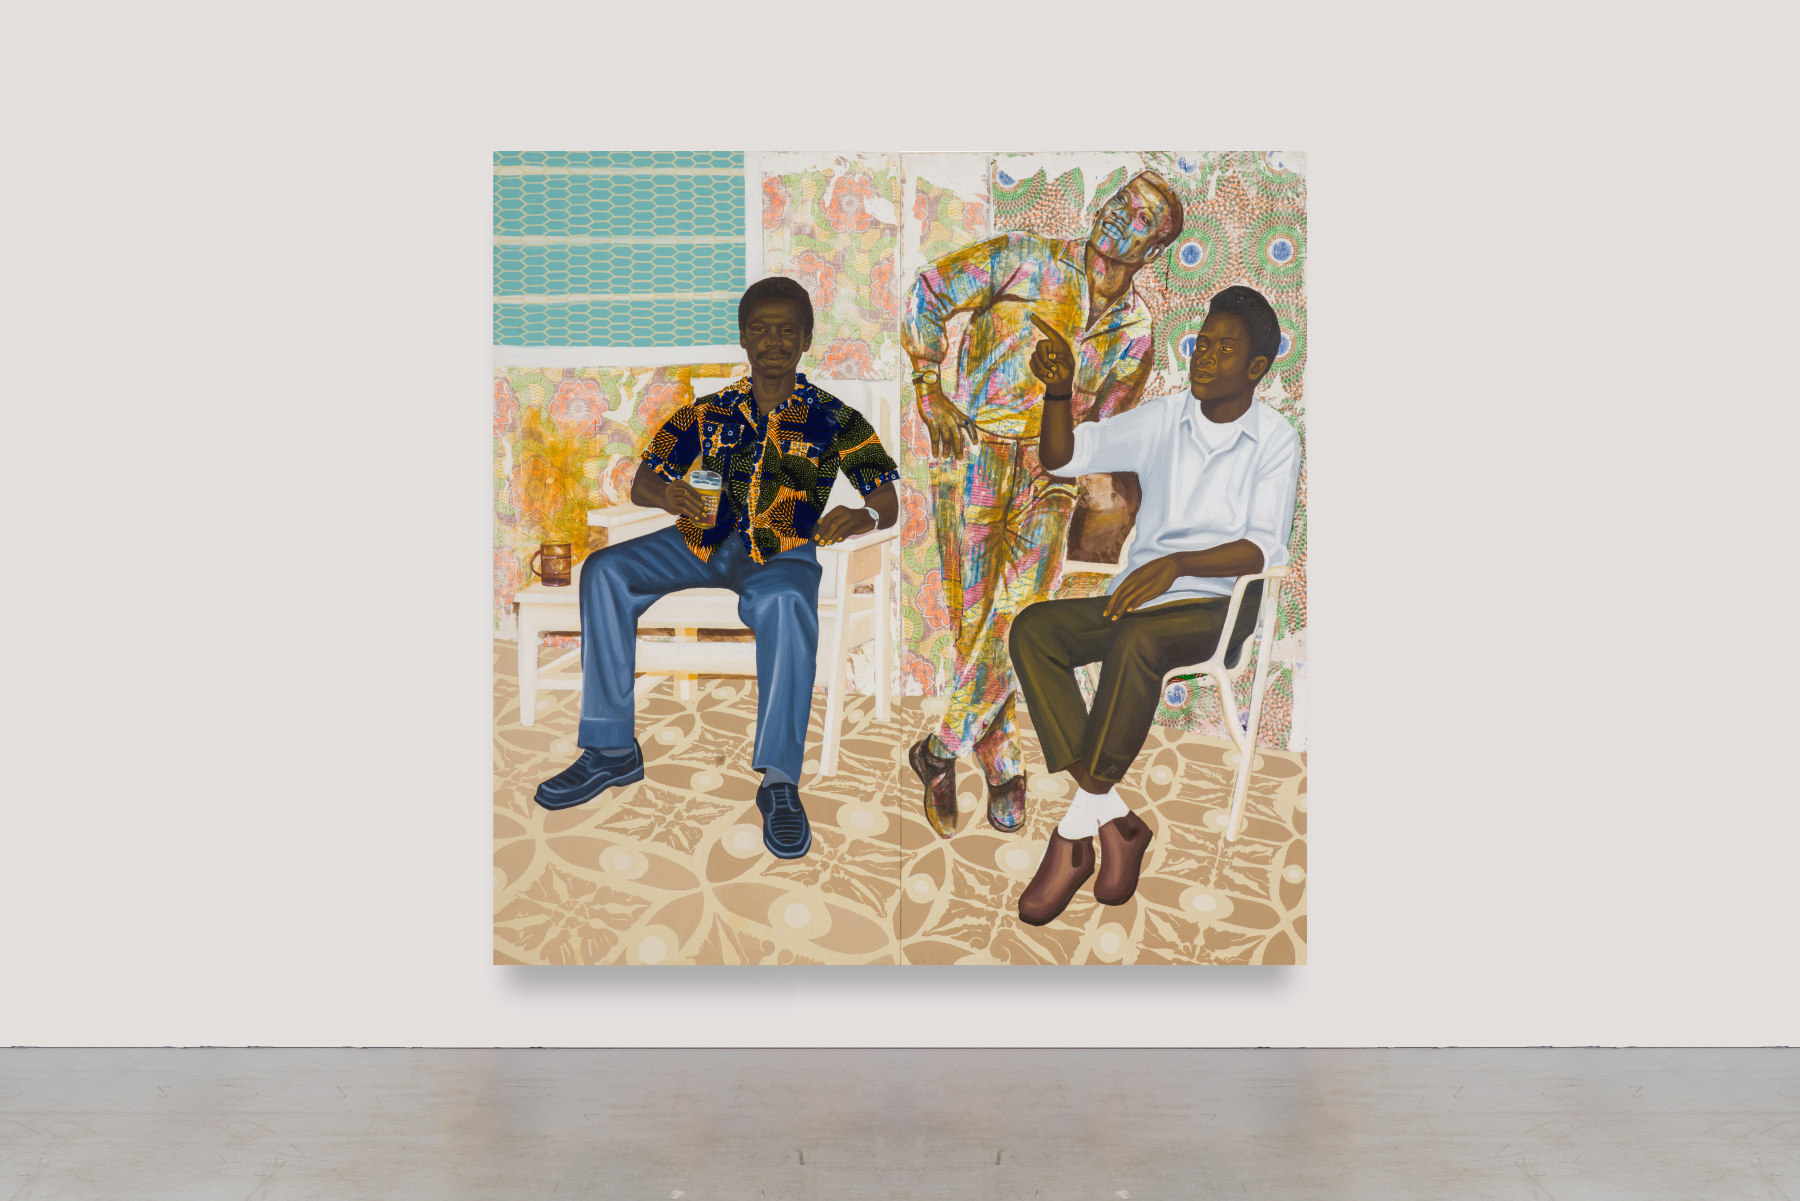 Cornelius Annor, "Obiaa beko," 2021 Diptych: fabric collage, fabric transfer, and acrylic on canvas Overall: 72 1/4 x 72 1/4 in (183 x 183 cm) Each panel: 72 1/4 x 36 1/4 in (183 x 91.5 cm)